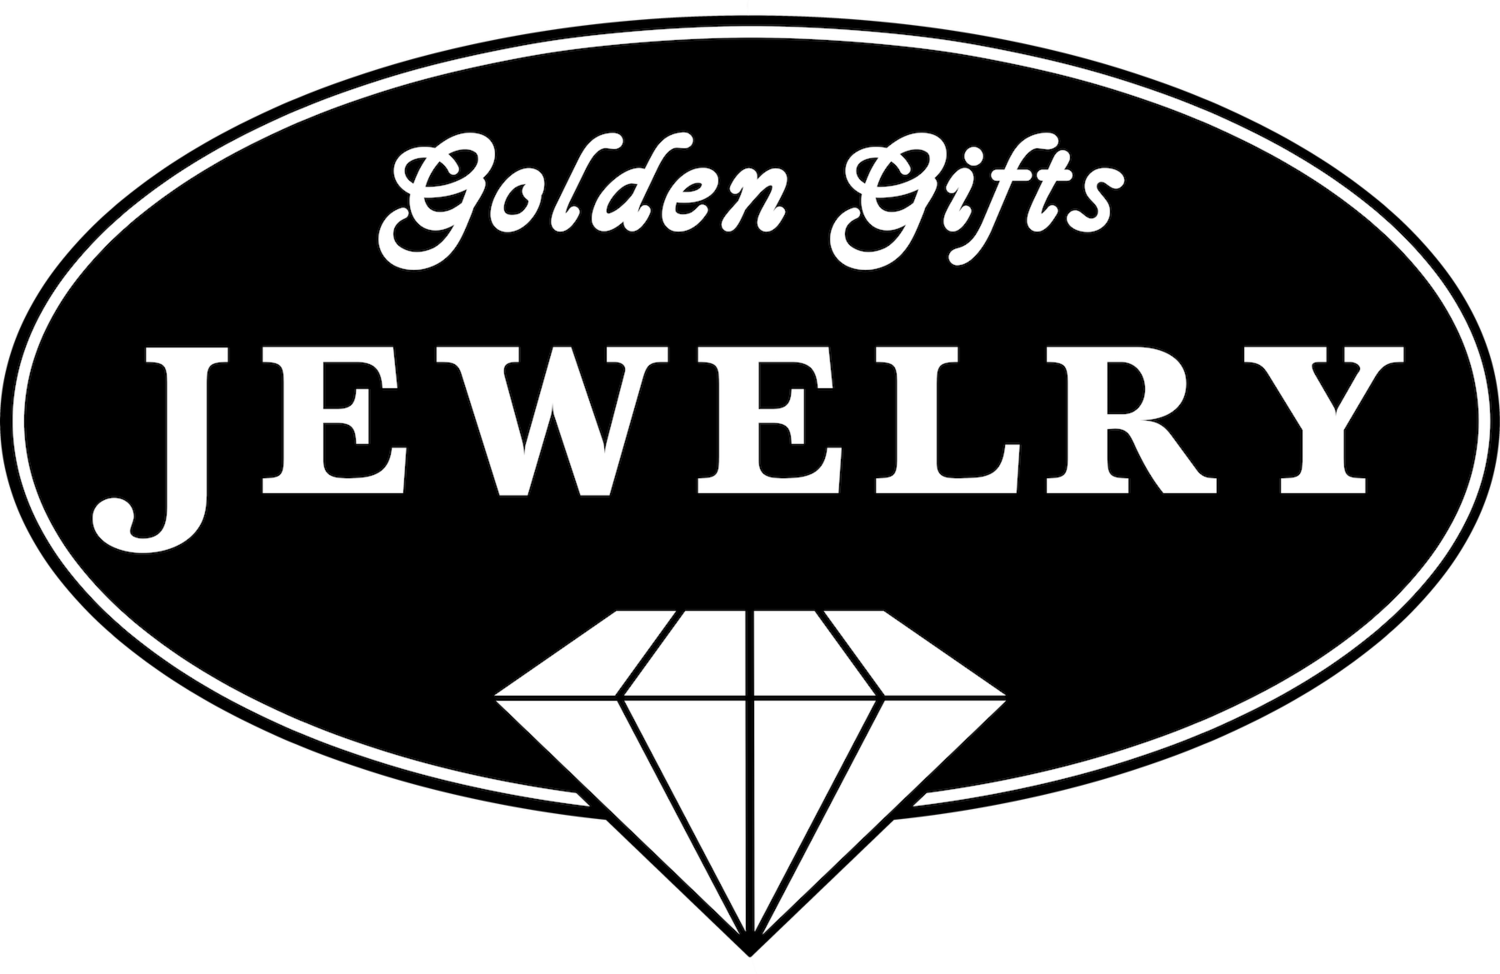 Golden Gifts Jewelry